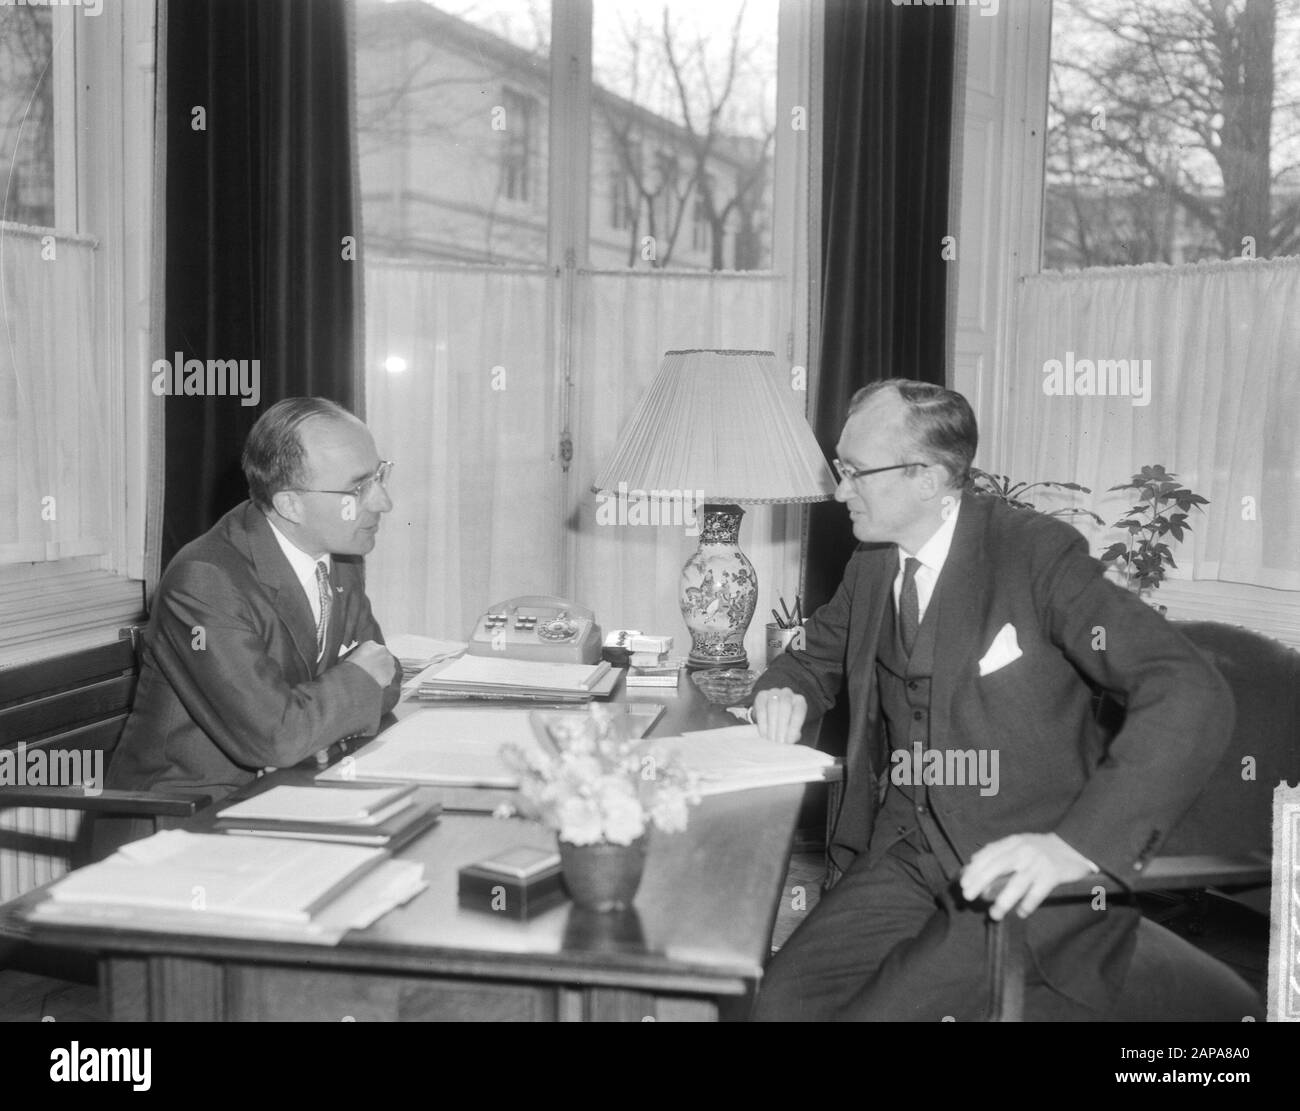 De cabinet crisis, mr. Cals and minister Witteveen Date: March 17, 1965 Keywords: KABINETSCRISIS Personal name: Cals, Jo, Witteveen, Johan Stock Photo